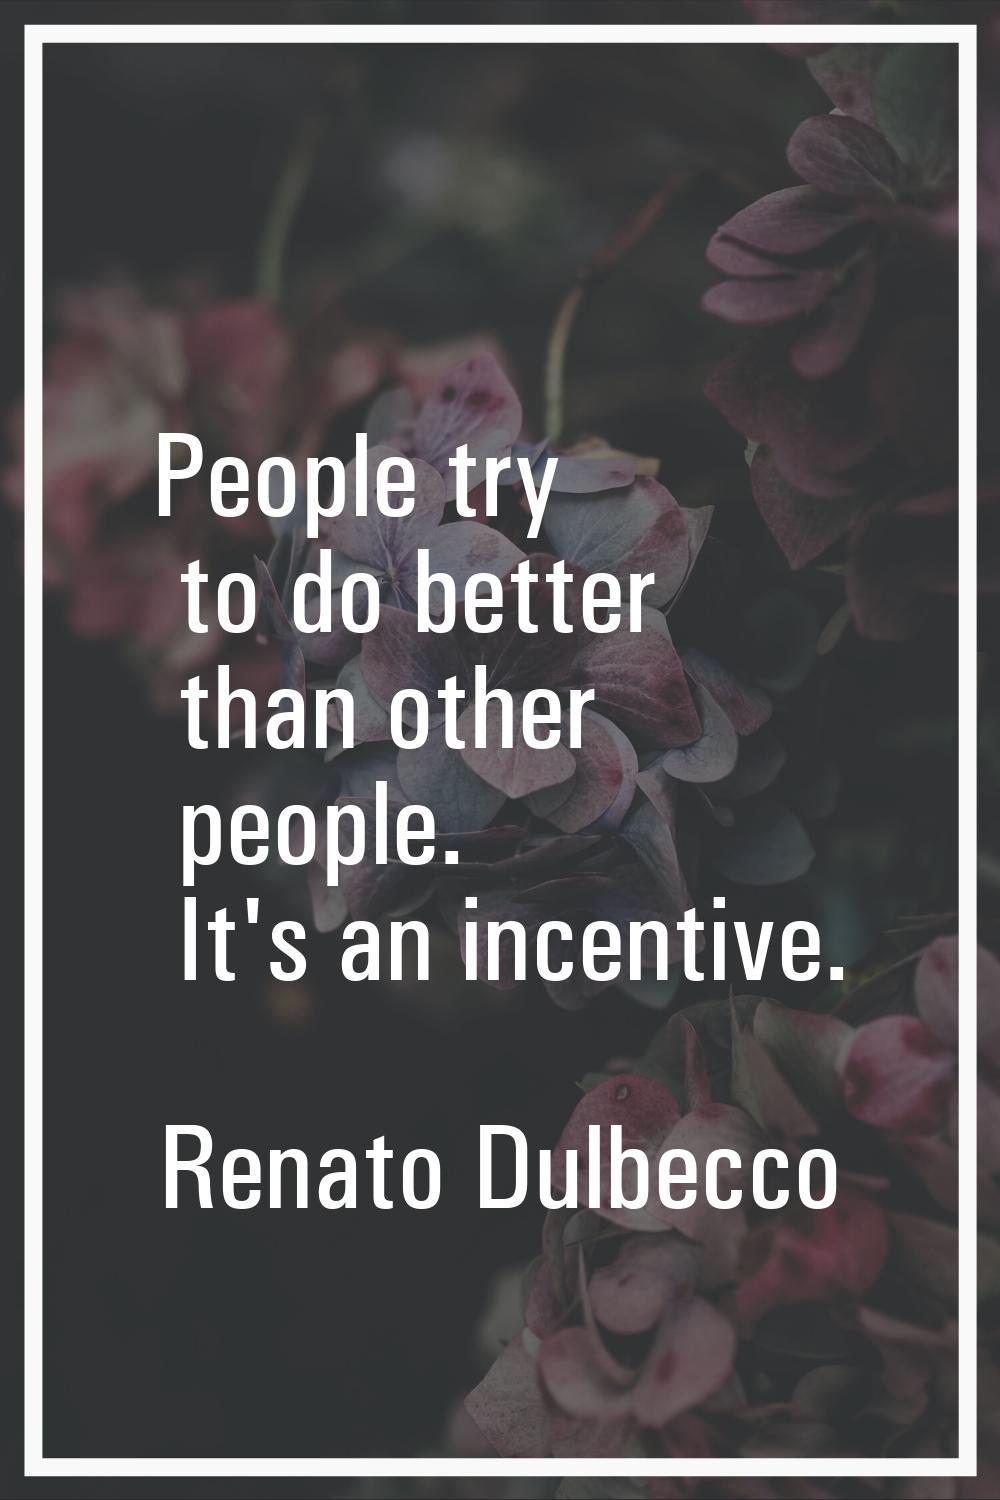 People try to do better than other people. It's an incentive.